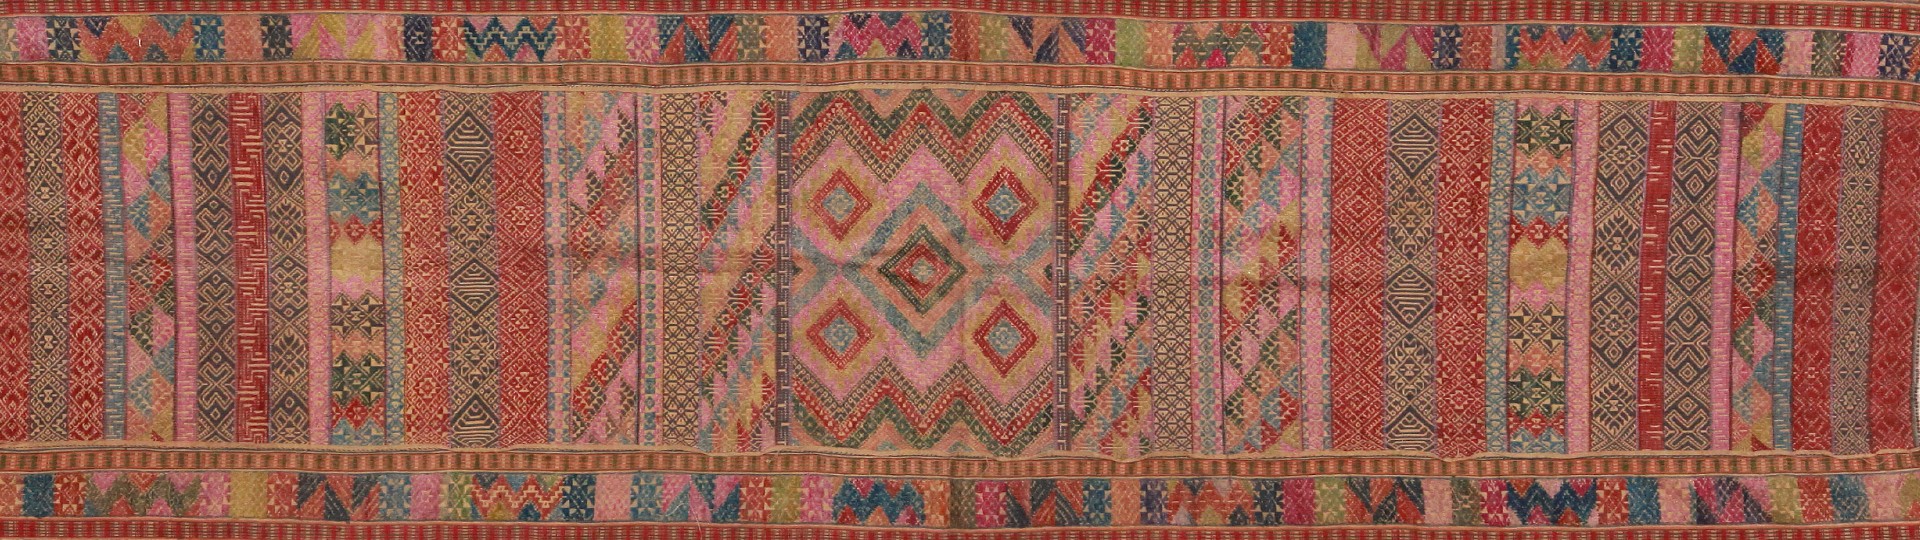 Day 2 . 100 Years of Collecting Textiles by Lilo Markrich and Heinz E. Kiewe | No Reserve  by Nazmiyal Auction